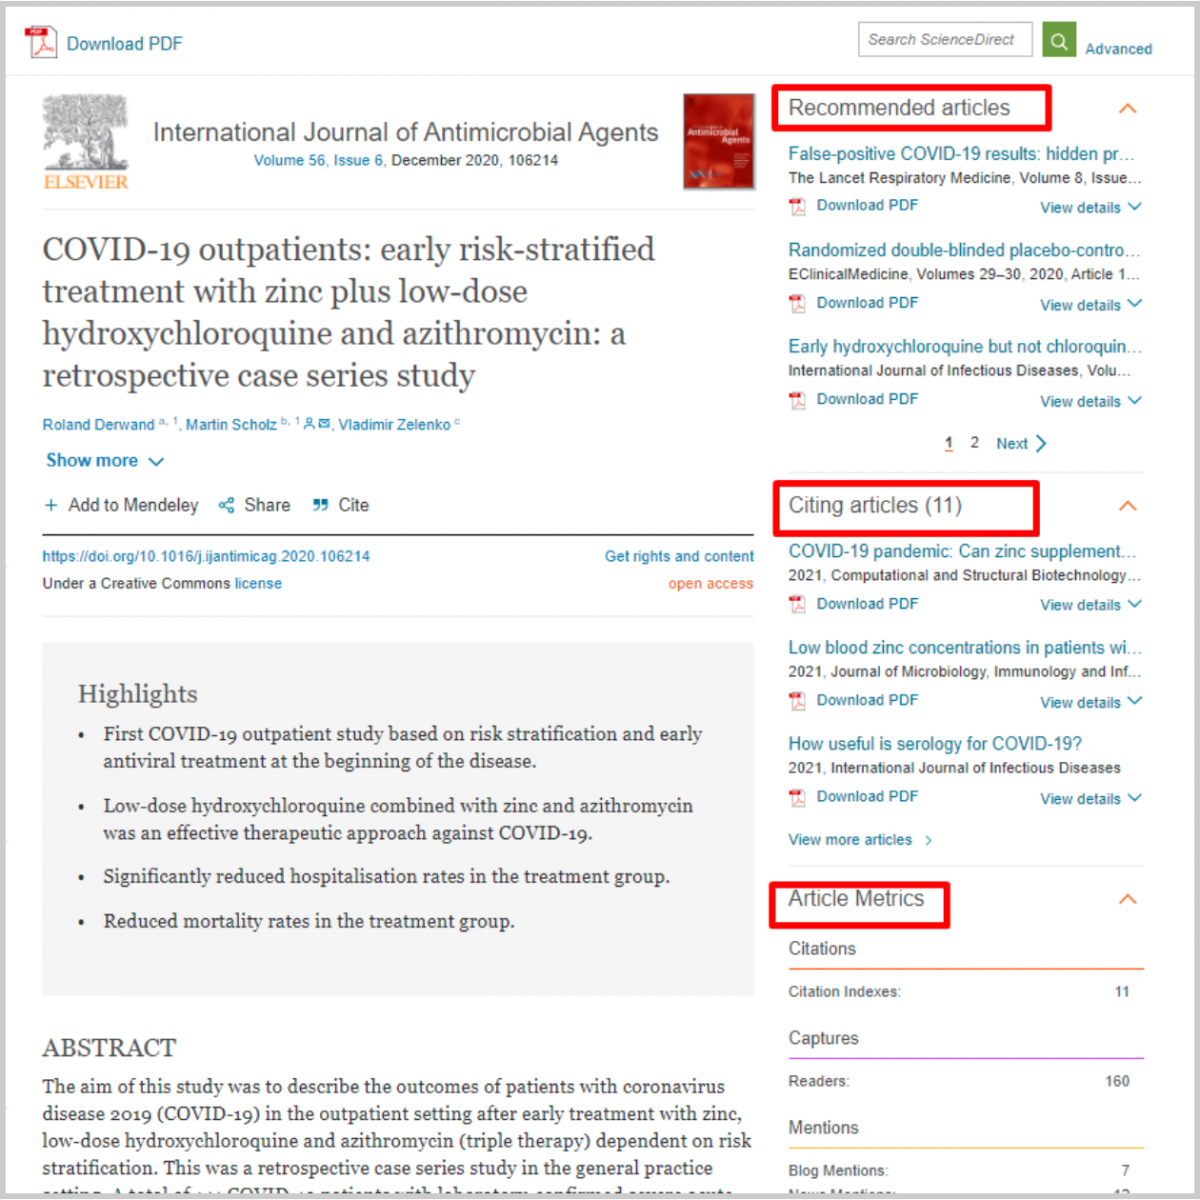 Example of a standard article from the database. Abstract is displayed with an option to download the full pdf. On the right side of the screen there are also recommended articles, citing articles and article metrics.